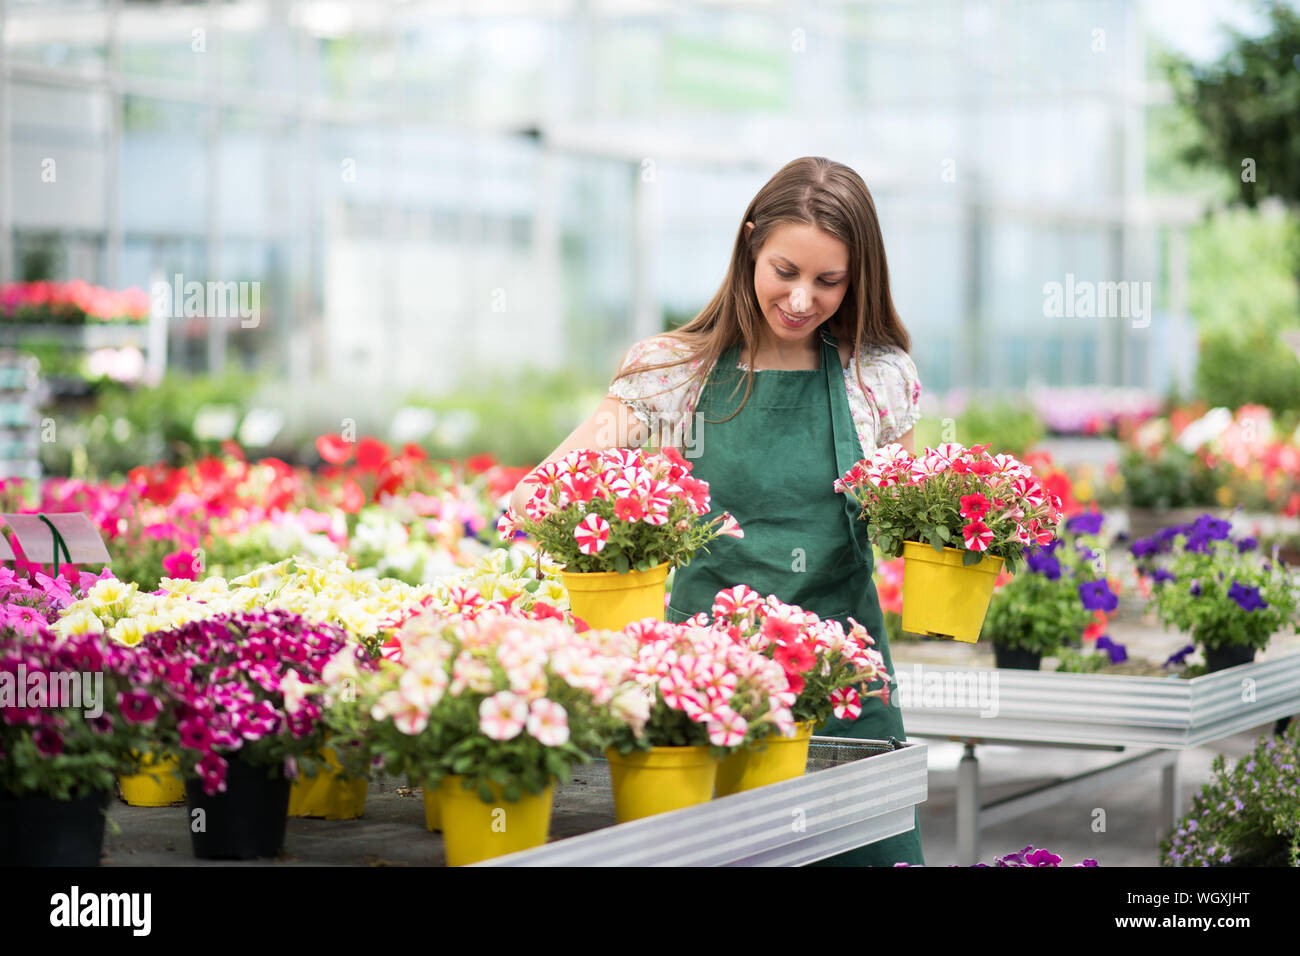 Young worker in a nursery packing out plants onto the display handling potted variegated or striped Surfinia or Petunias Stock Photo